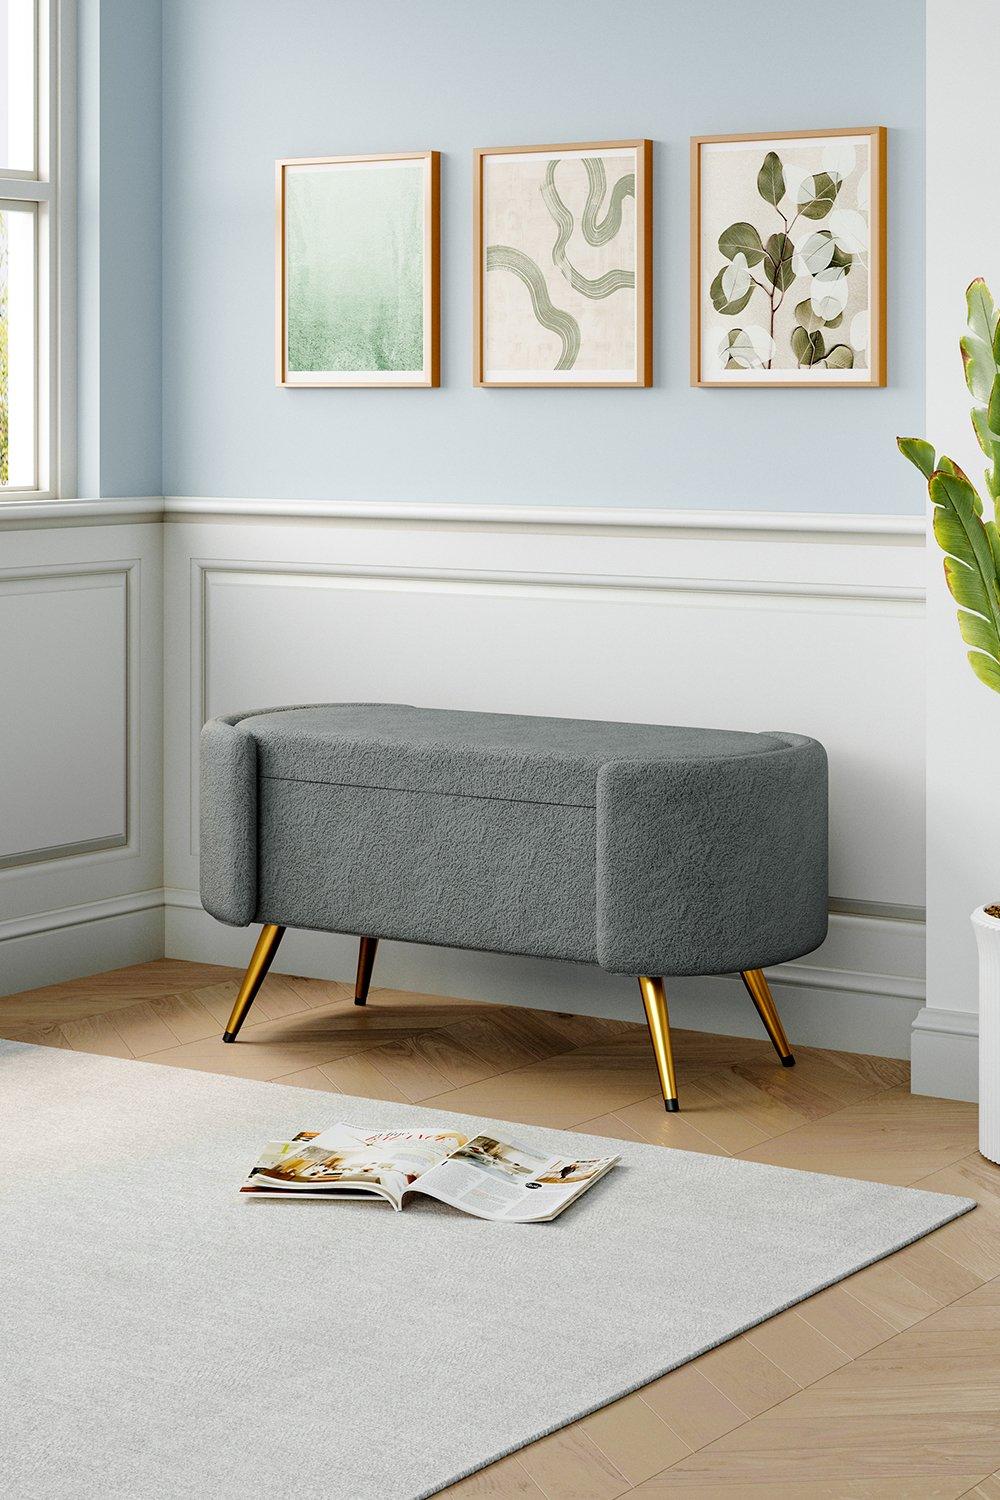 Grey Polar Fleece Oval Accent Bench with Gold Metal Legs Bedroom Bed End Stool